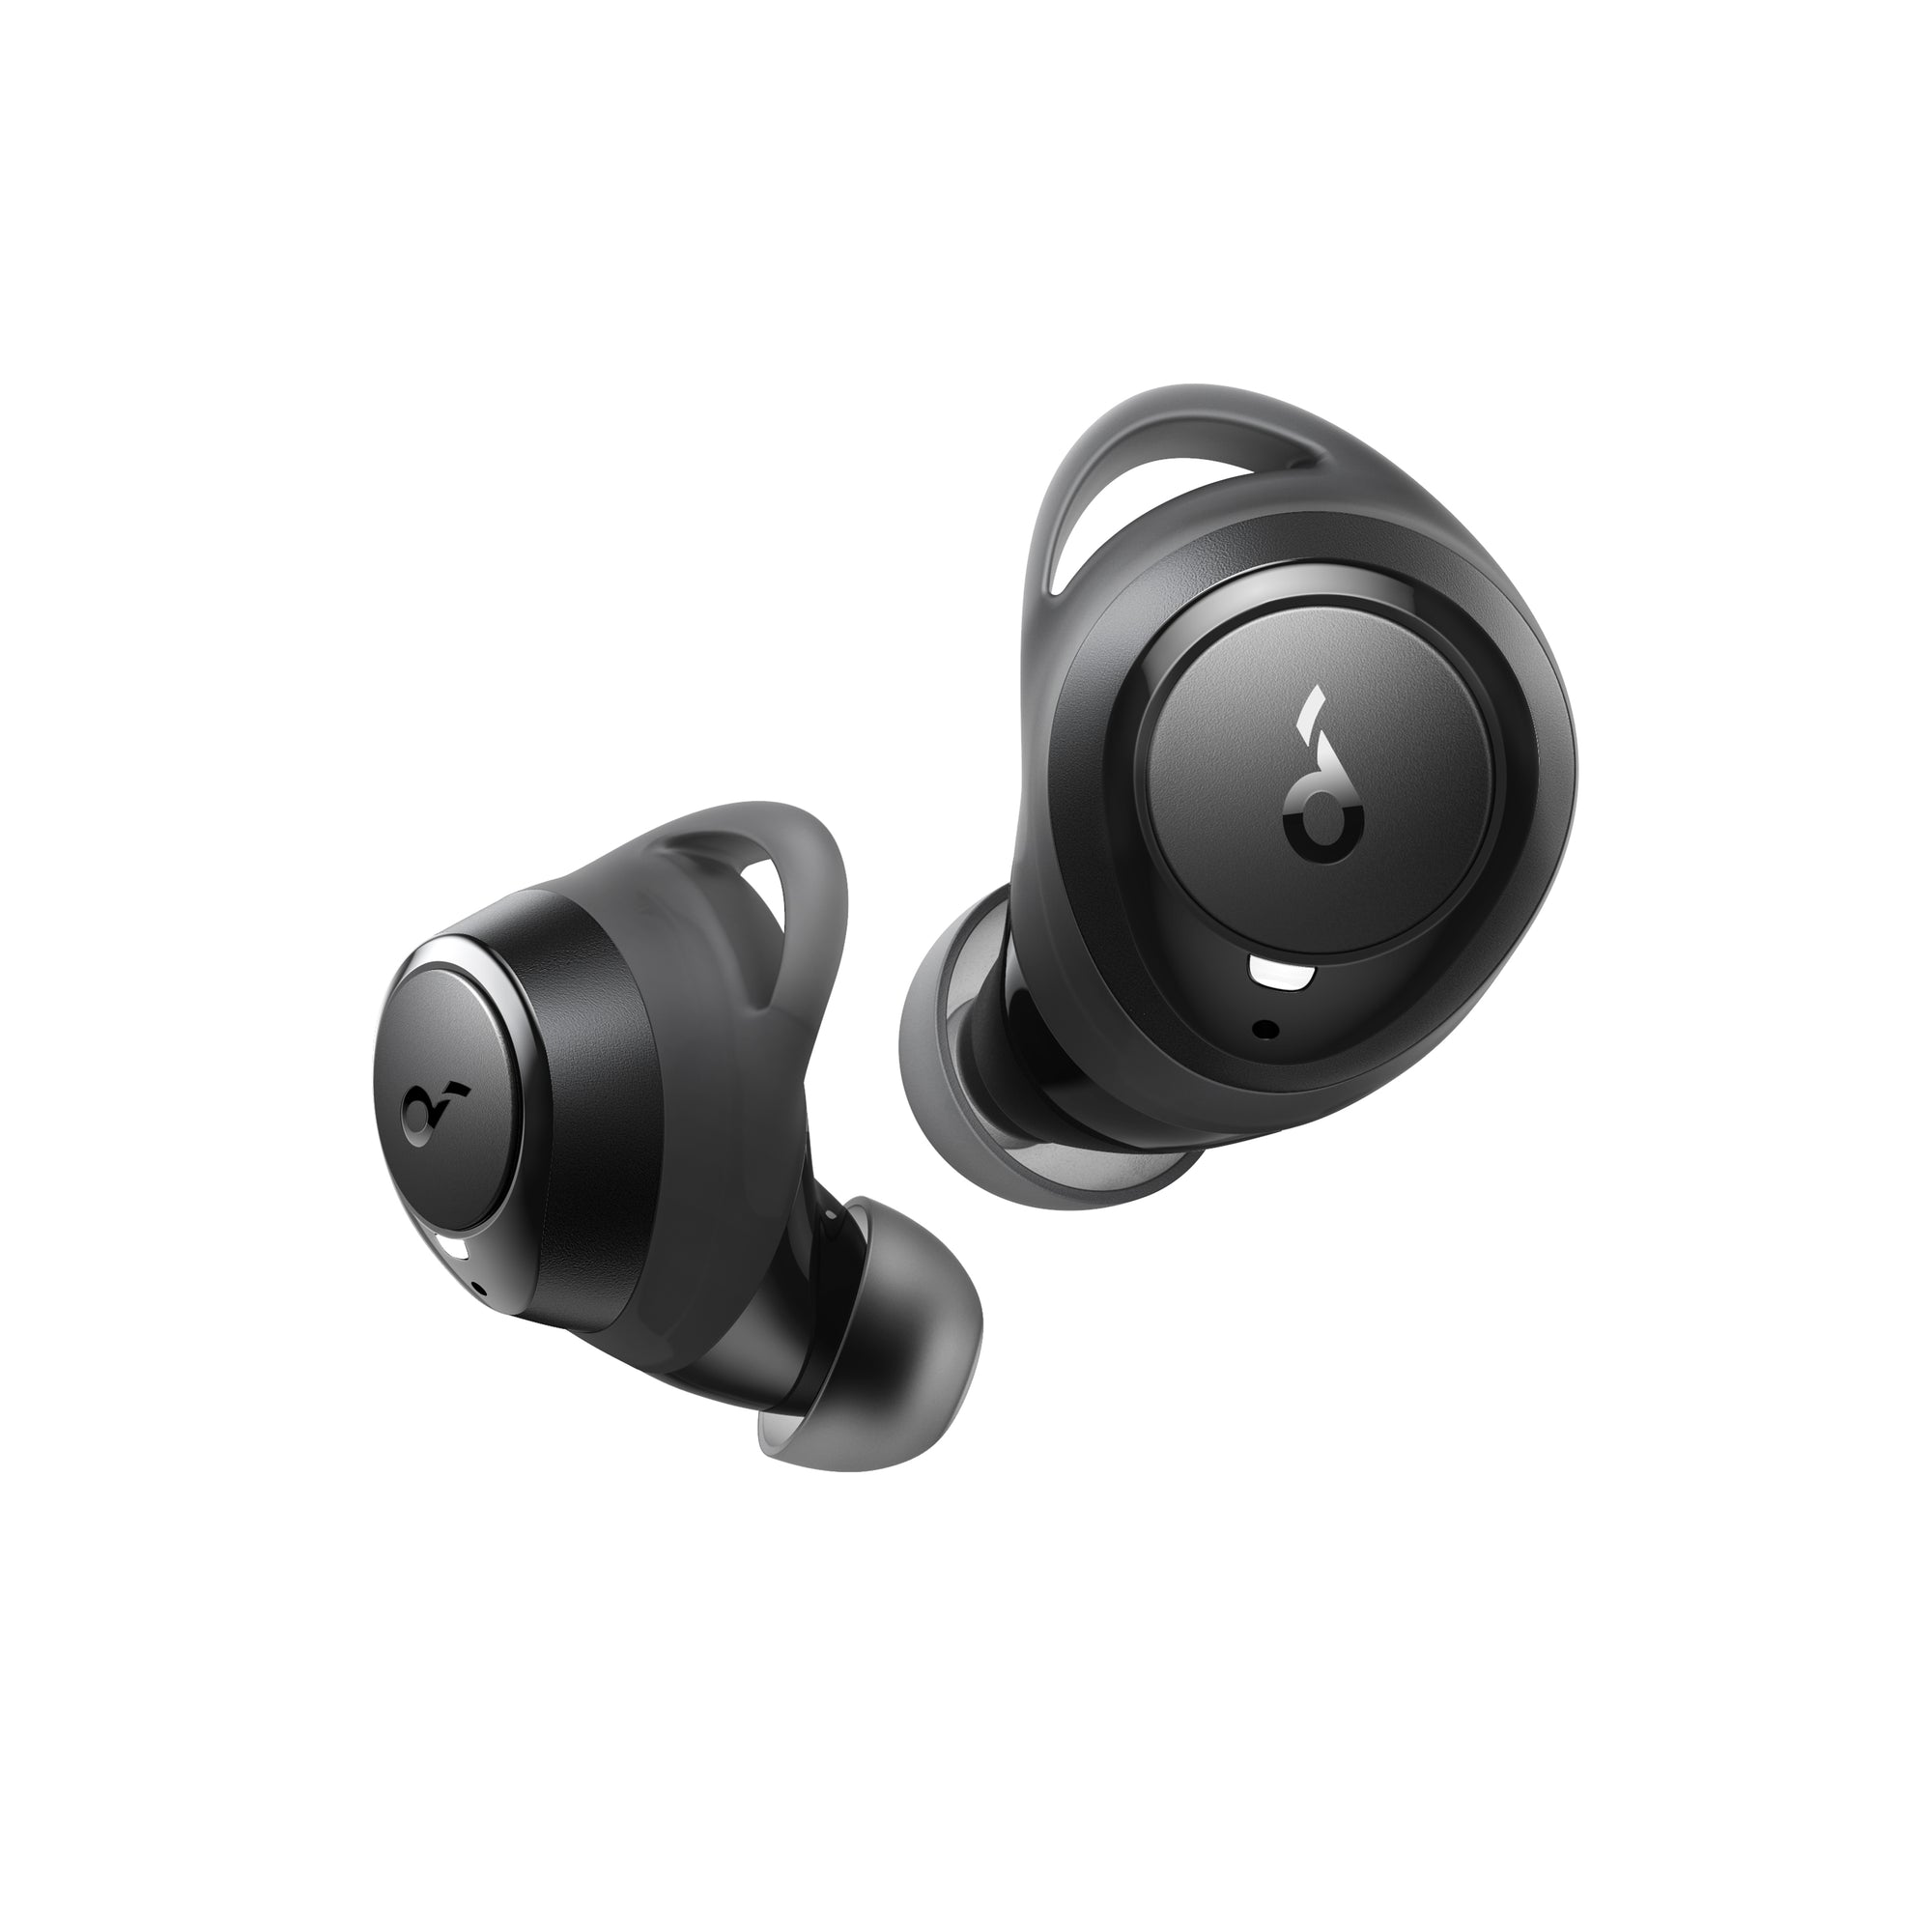 Life A1, Powerful Customized Sound Earbuds - soundcore US